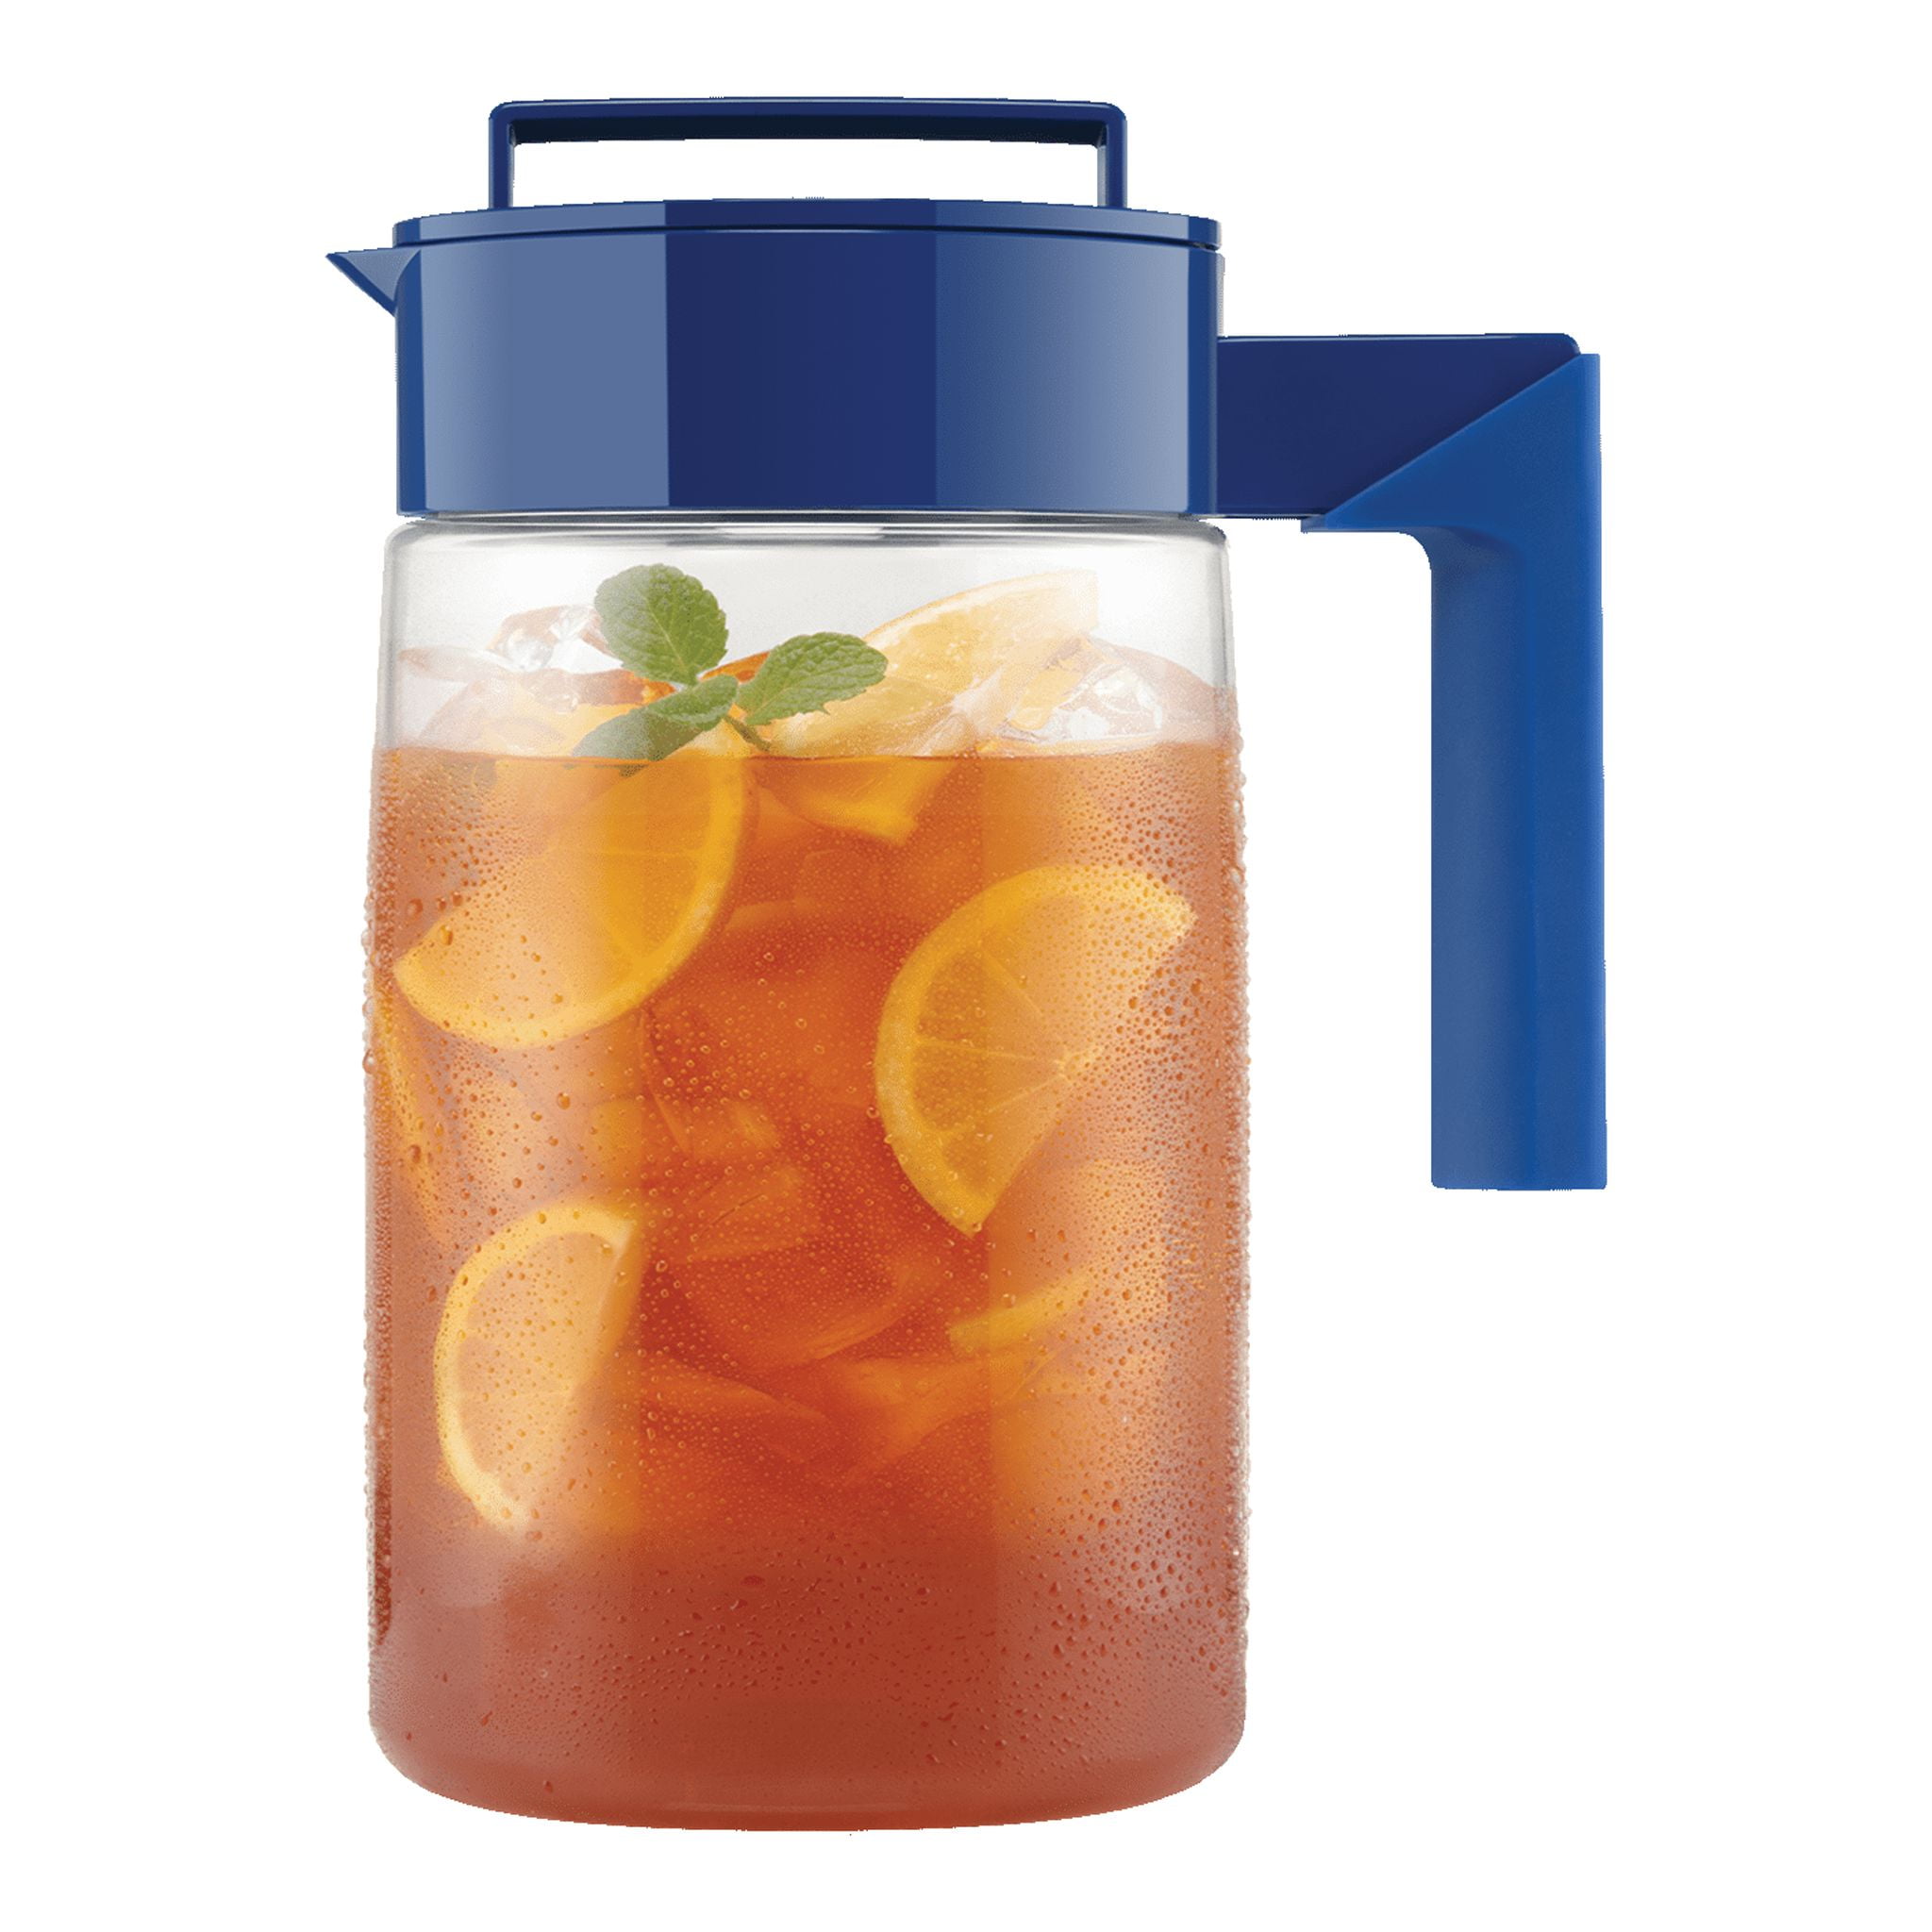 Easy-Pack Container & Lid Juice Pitcher 1 ea, Plastic Containers